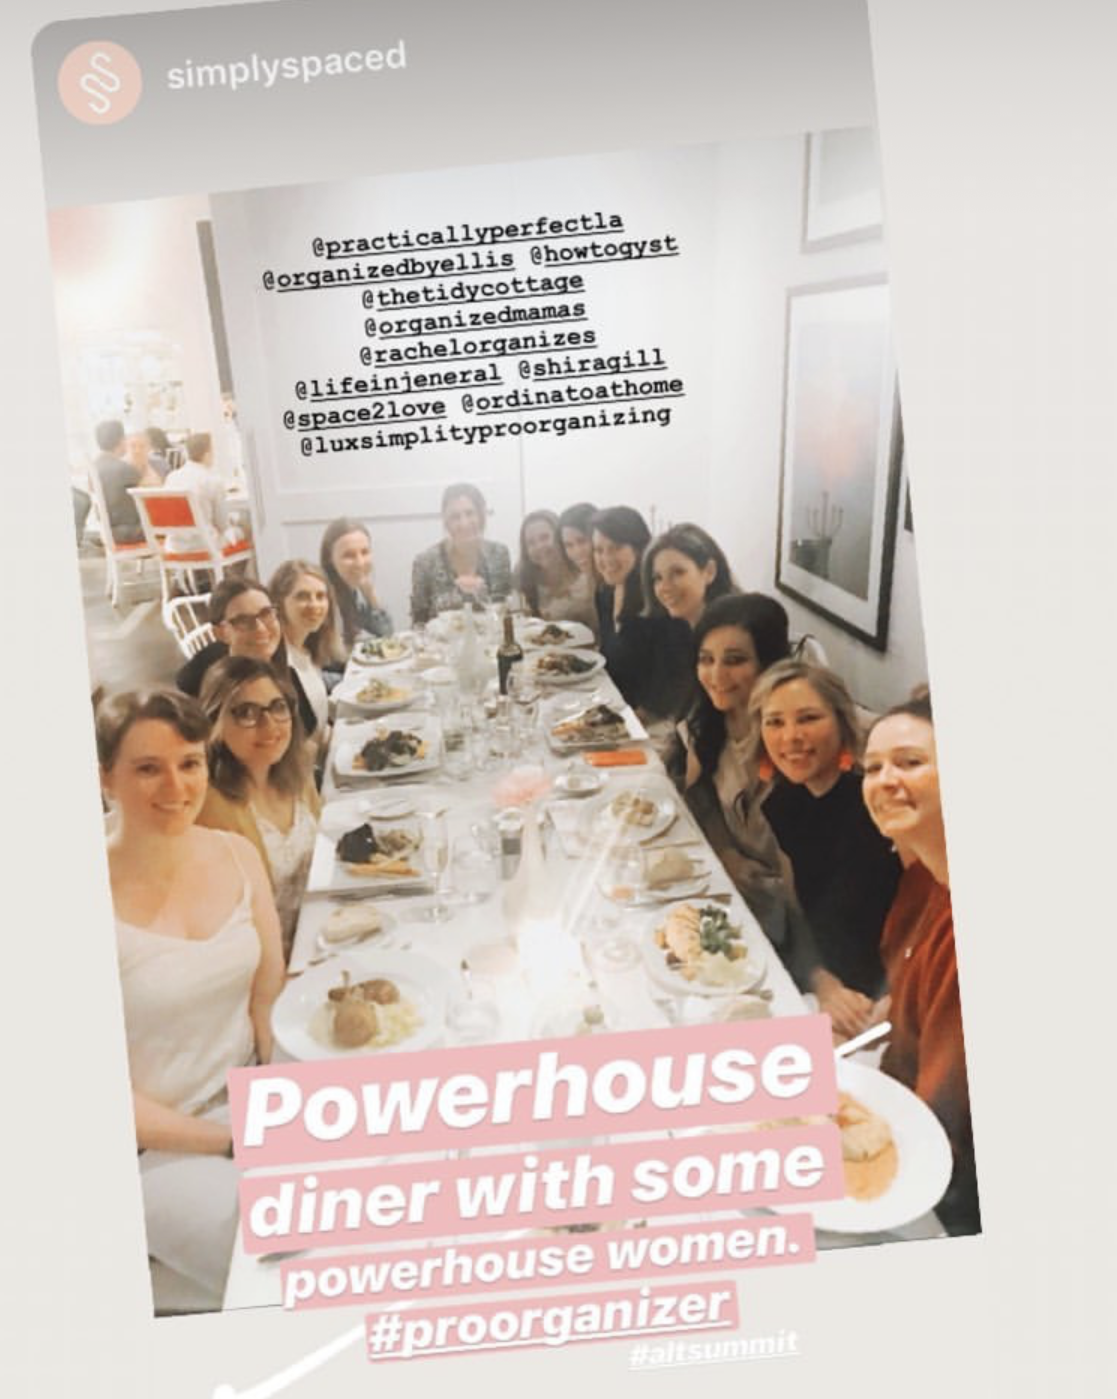 I met and had dinner with 12 other amazing organizers from across the country!